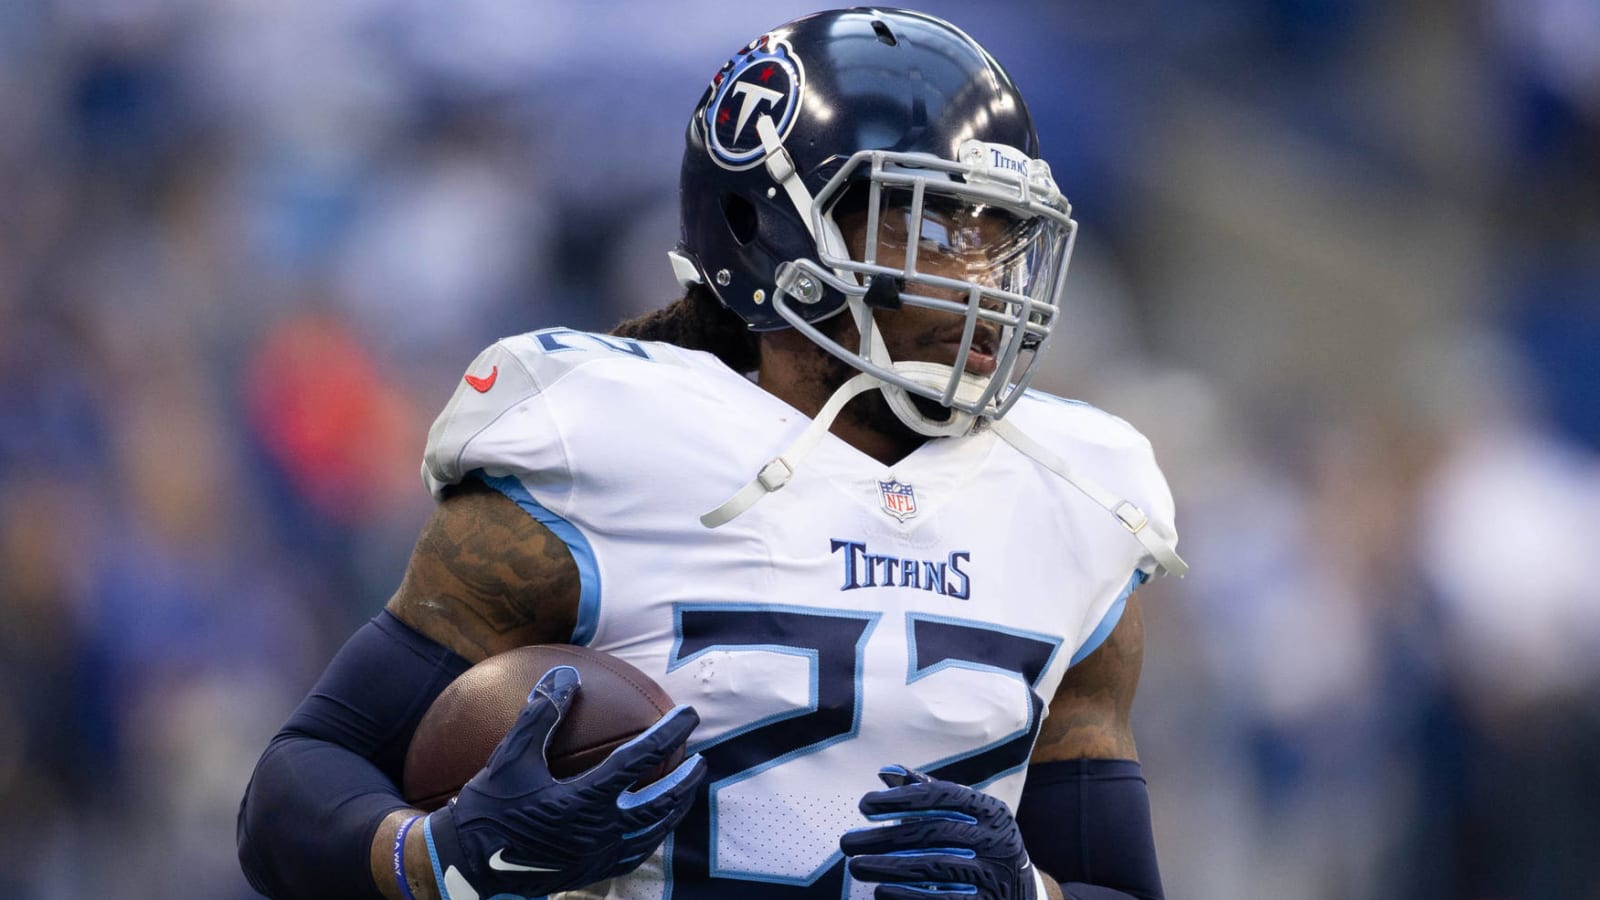 Titans RB Derrick Henry could miss rest of season with foot injury